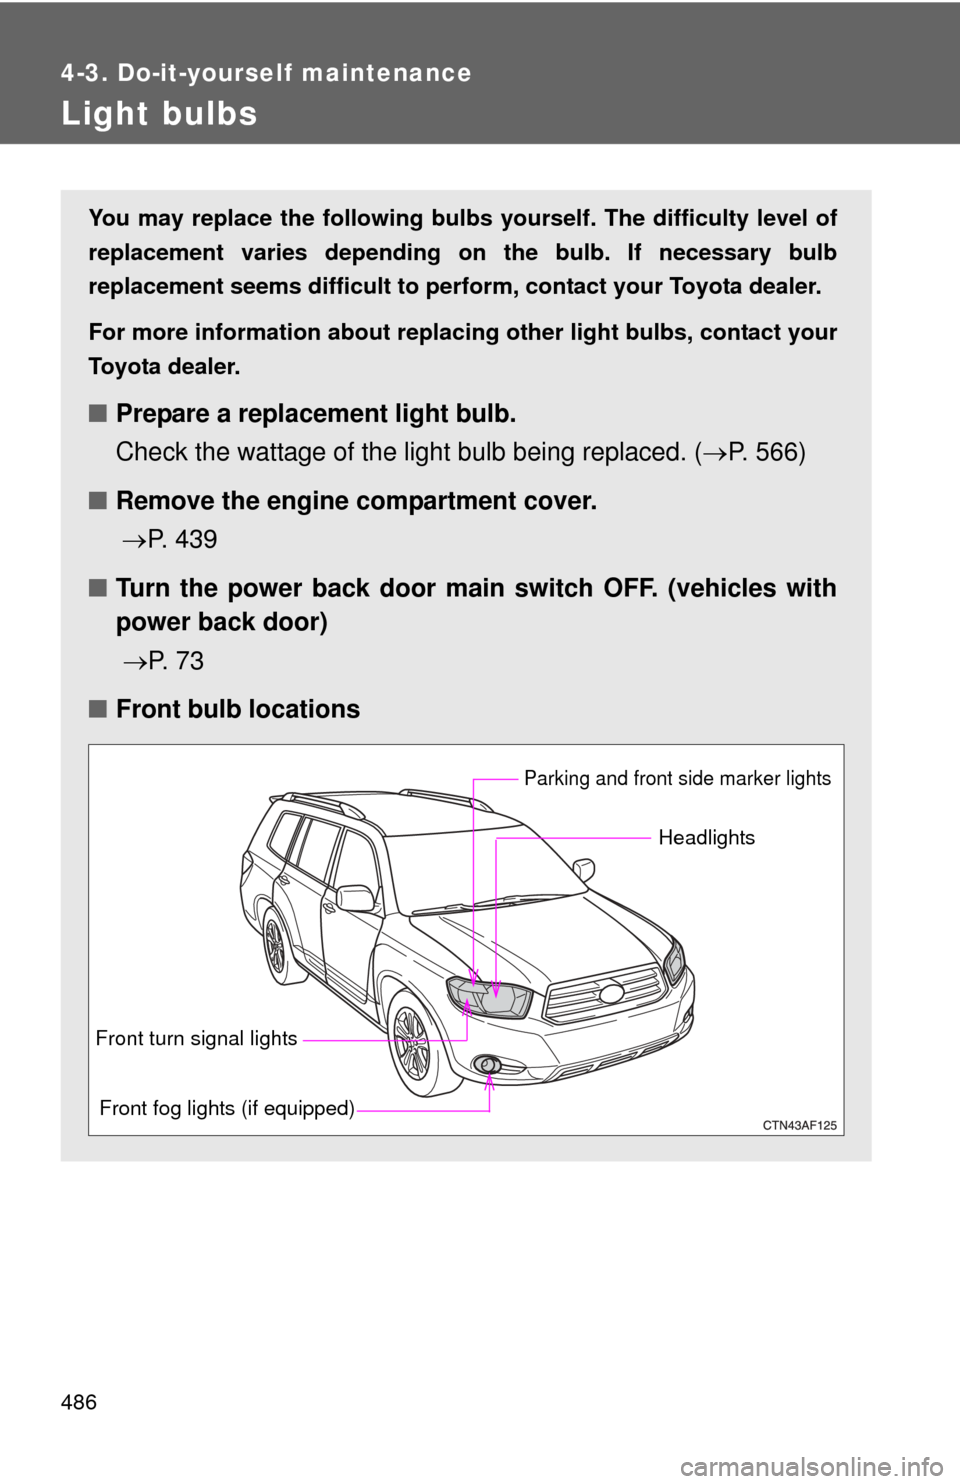 TOYOTA HIGHLANDER 2010 XU40 / 2.G Owners Guide 486
4-3. Do-it-yourself maintenance
Light bulbs
You may replace the following bulbs yourself. The difficulty level of
replacement varies depending on the bulb. If necessary bulb
replacement seems diff